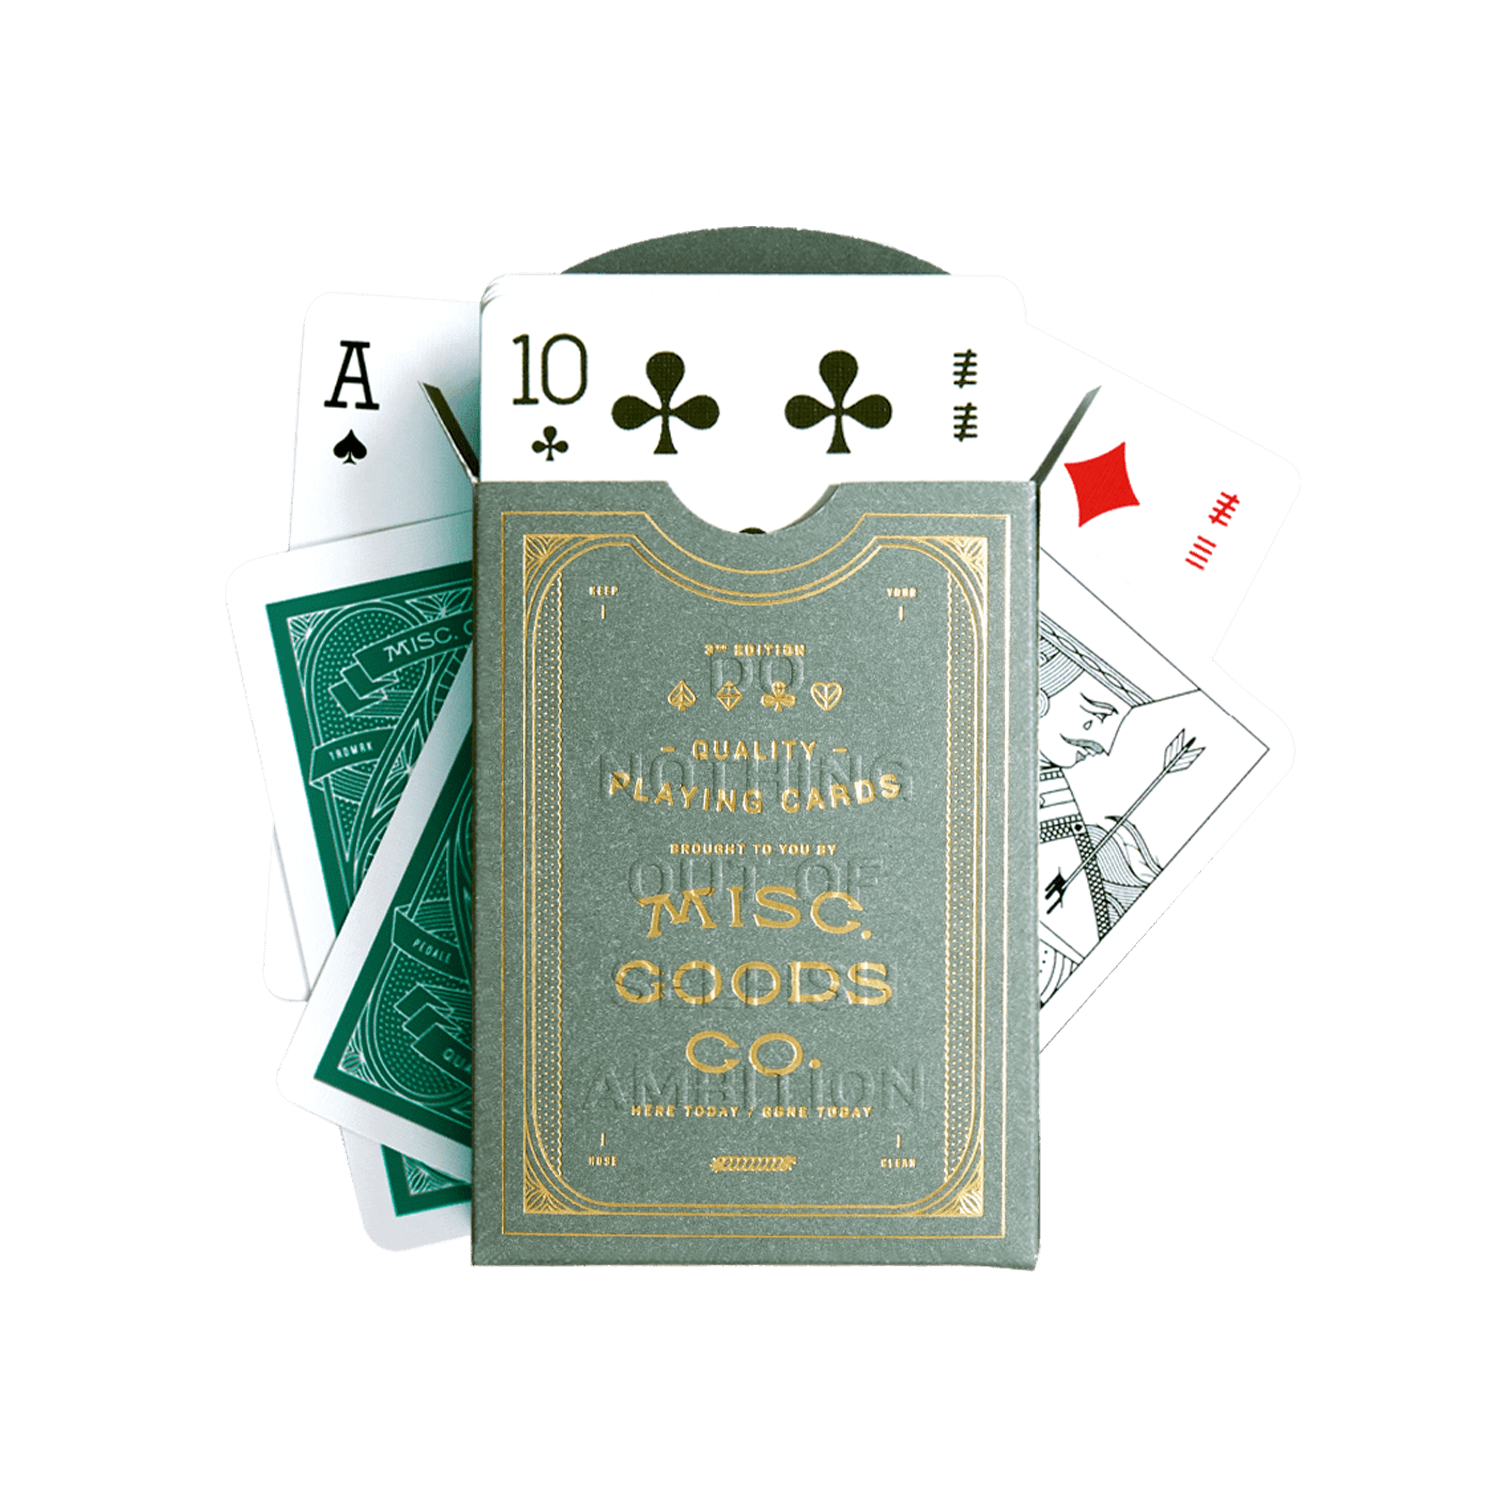 (Cacti) Misc. Goods Co. Playing Cards - [Bourbon and Whiskey]